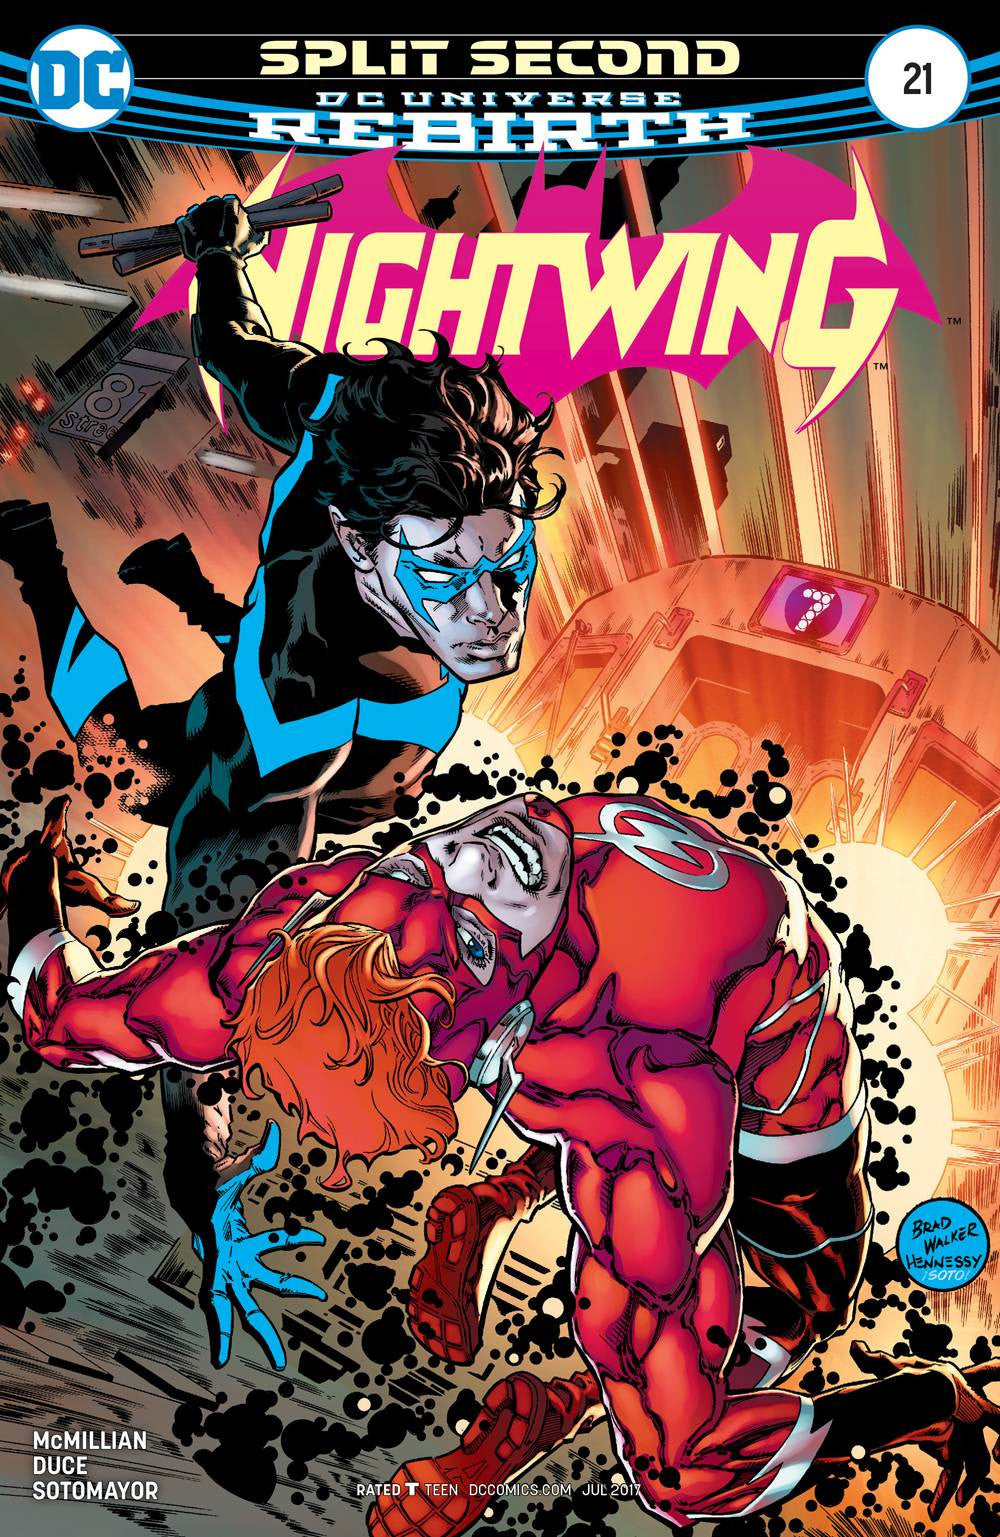 NIGHTWING #21 COVER